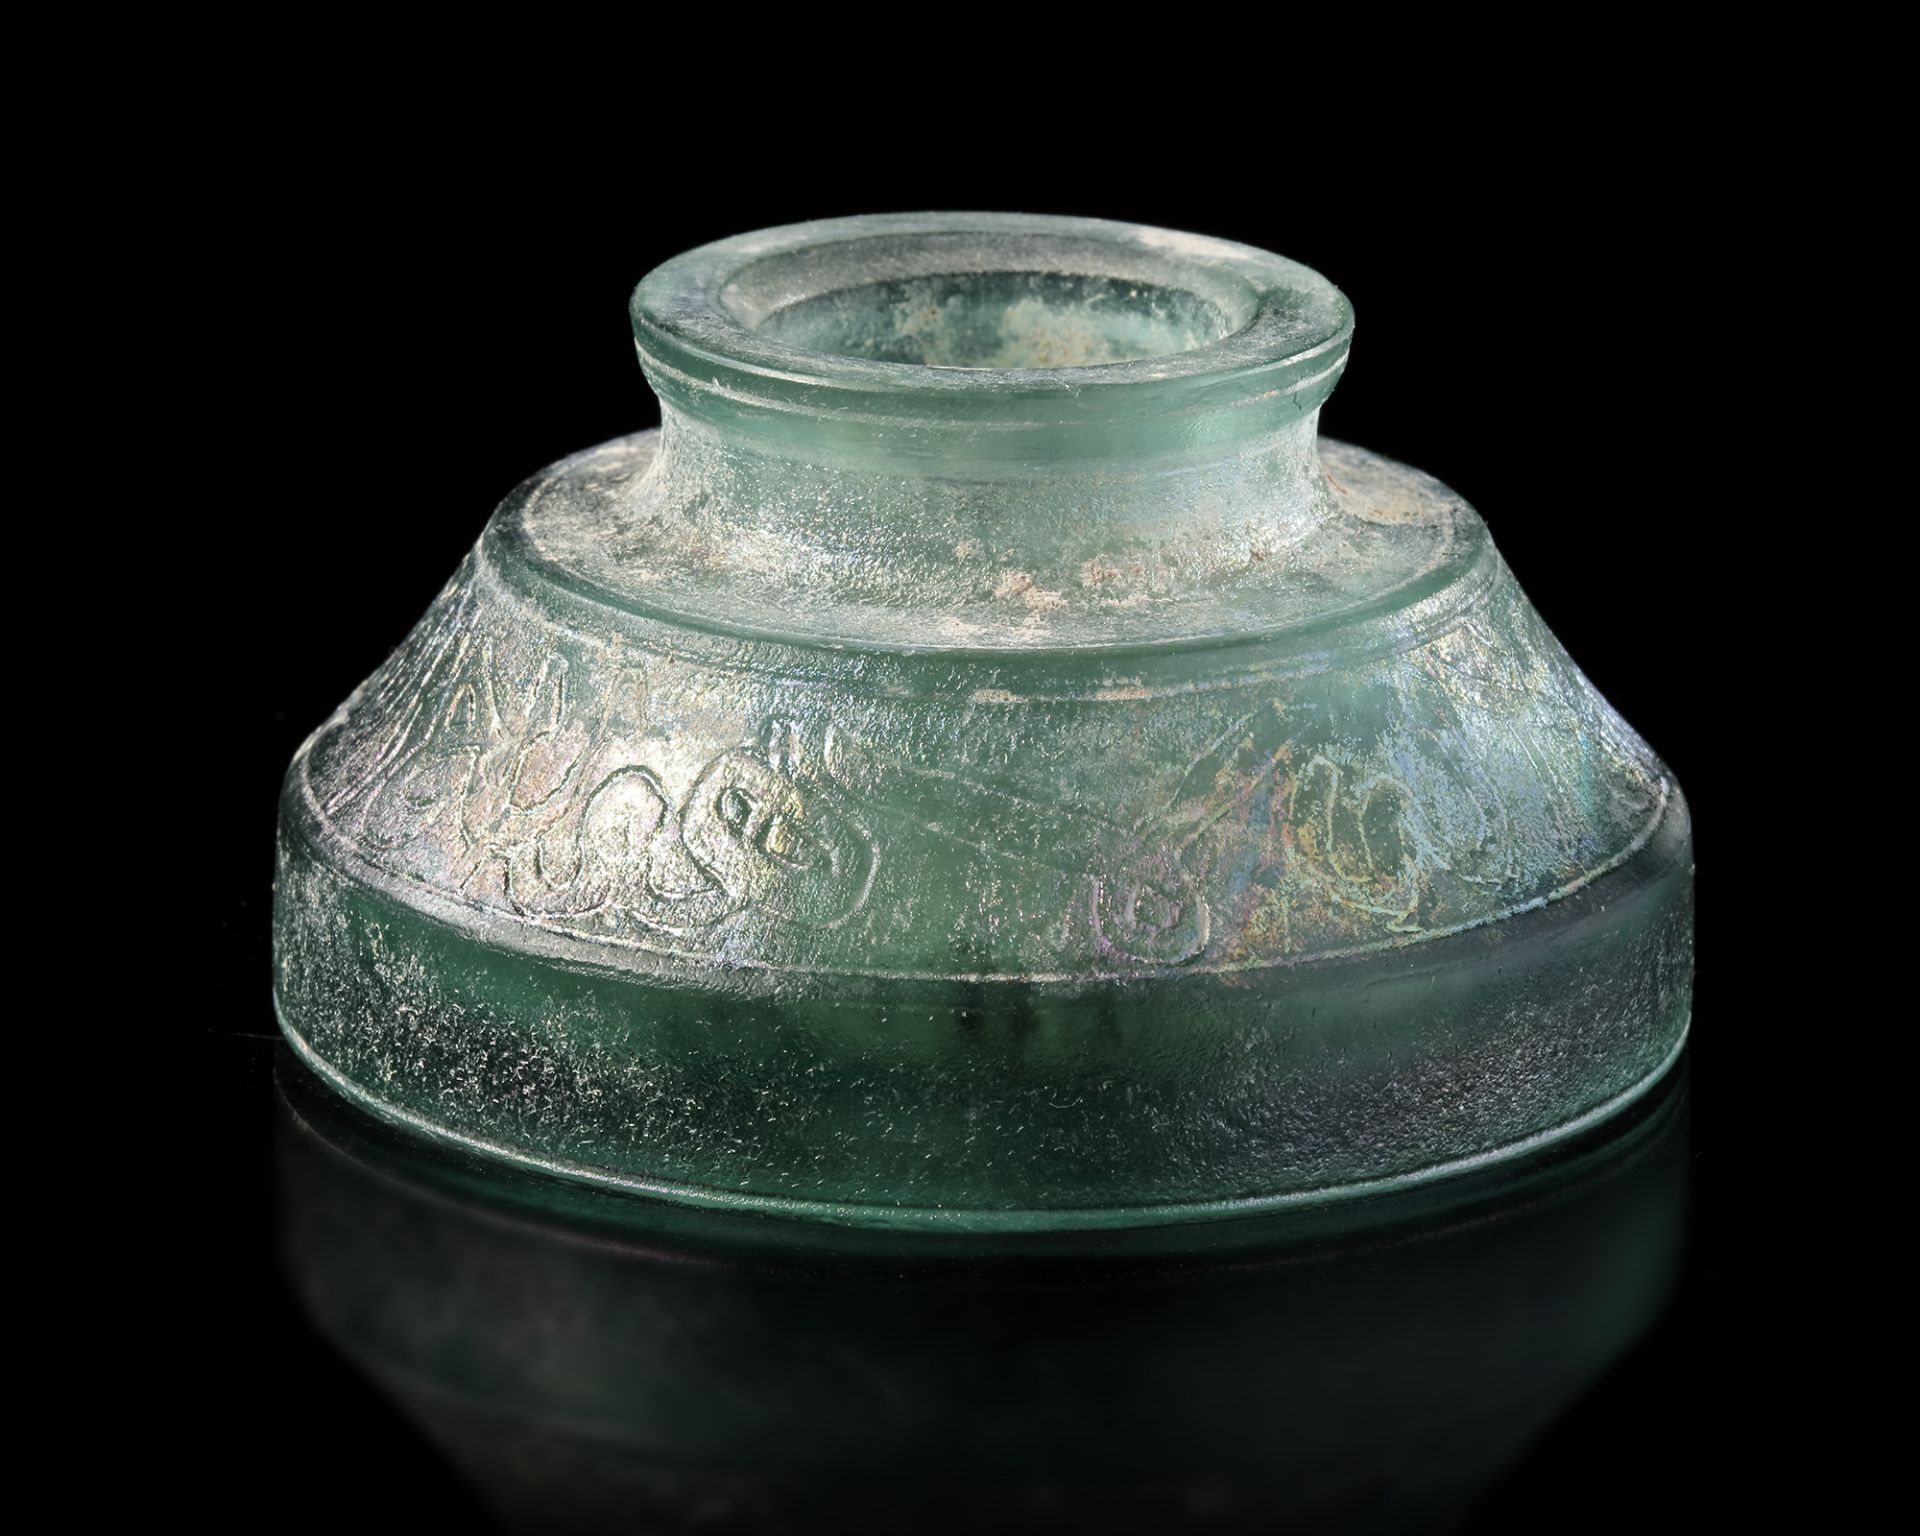 AN EARLY ISLAMIC GLASS INKWELL, PERSIA, 12TH-13TH CENTURY - Image 2 of 6